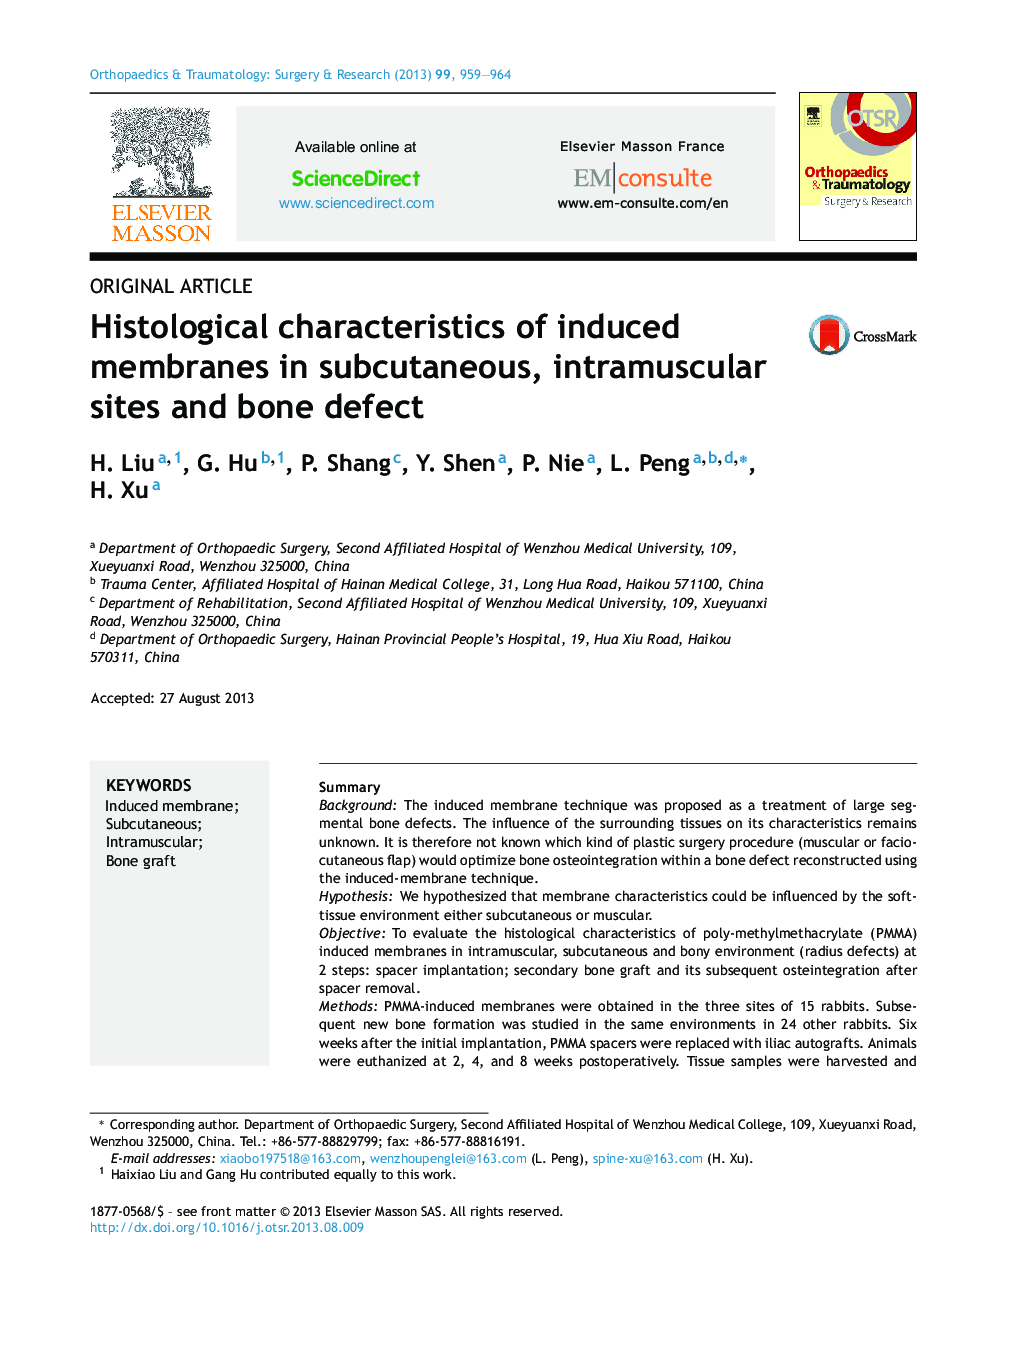 Histological characteristics of induced membranes in subcutaneous, intramuscular sites and bone defect